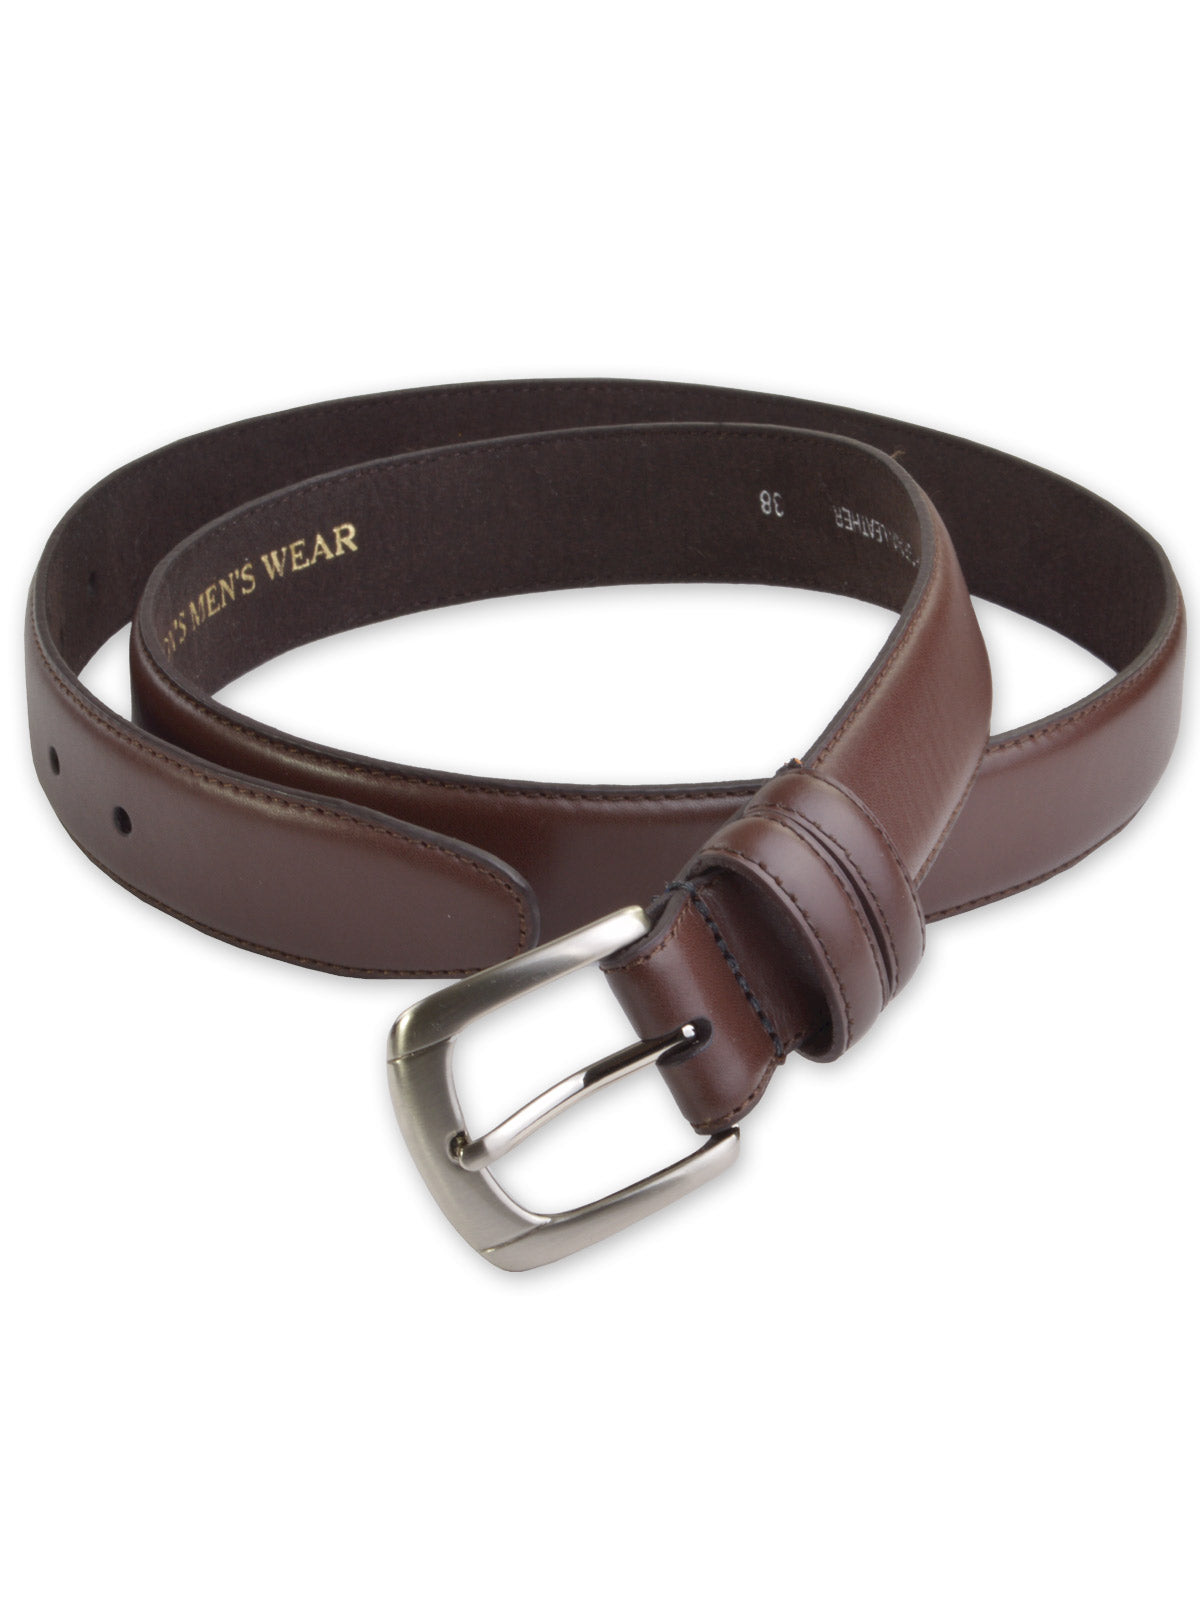 Marc Wolf Leather Dress Belts - Brown with Silver Buckle 400SLV-B-BRN (44-54)